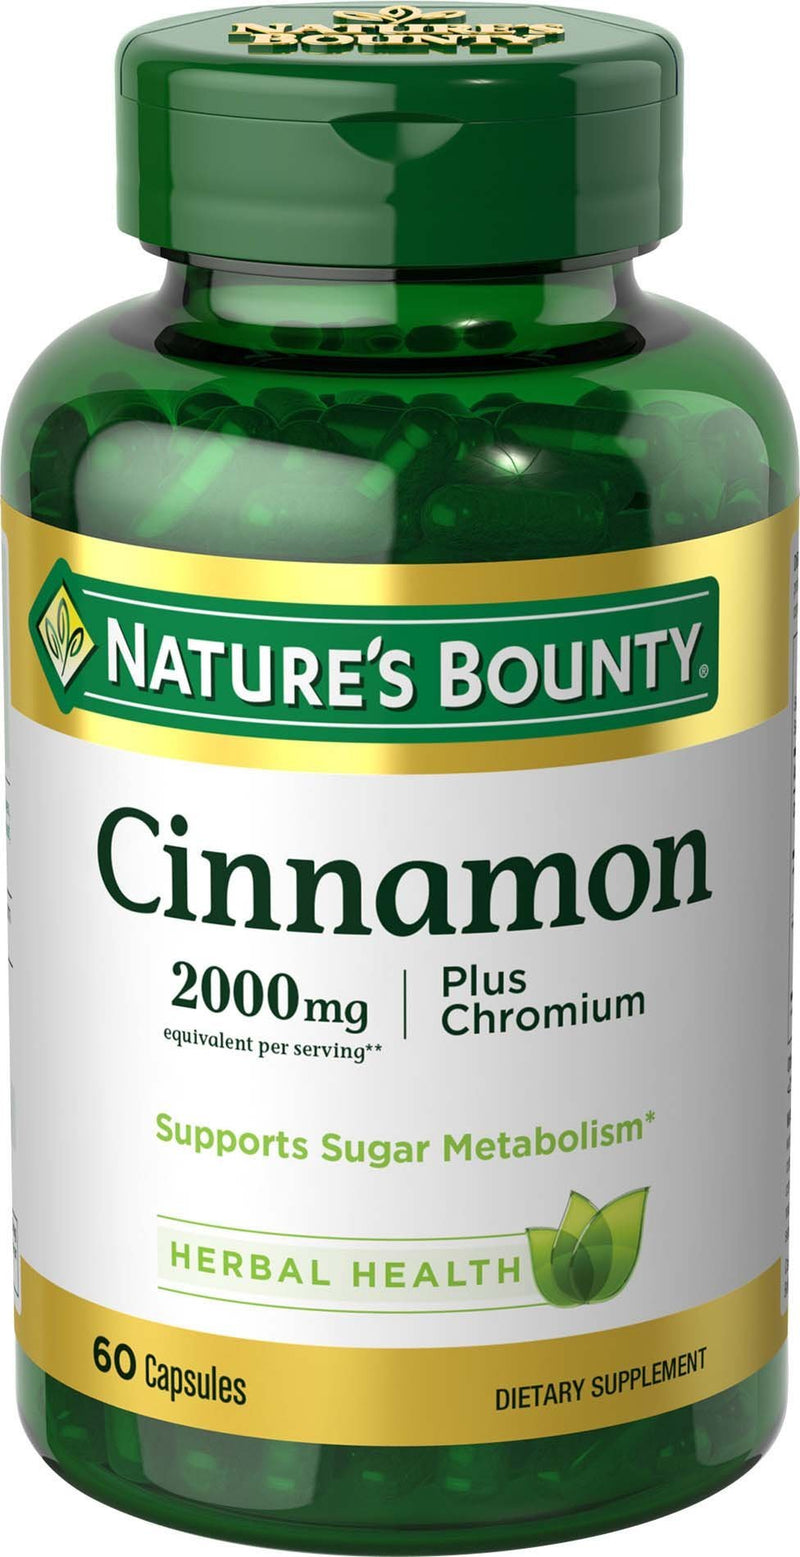 Cinnamon by Nature's Bounty, Herbal Supplement, Supports Sugar Metabolism, 2000mg Cinnamon Plus Chromium, 60 Capsules 60 Count (Pack of 1) - BeesActive Australia